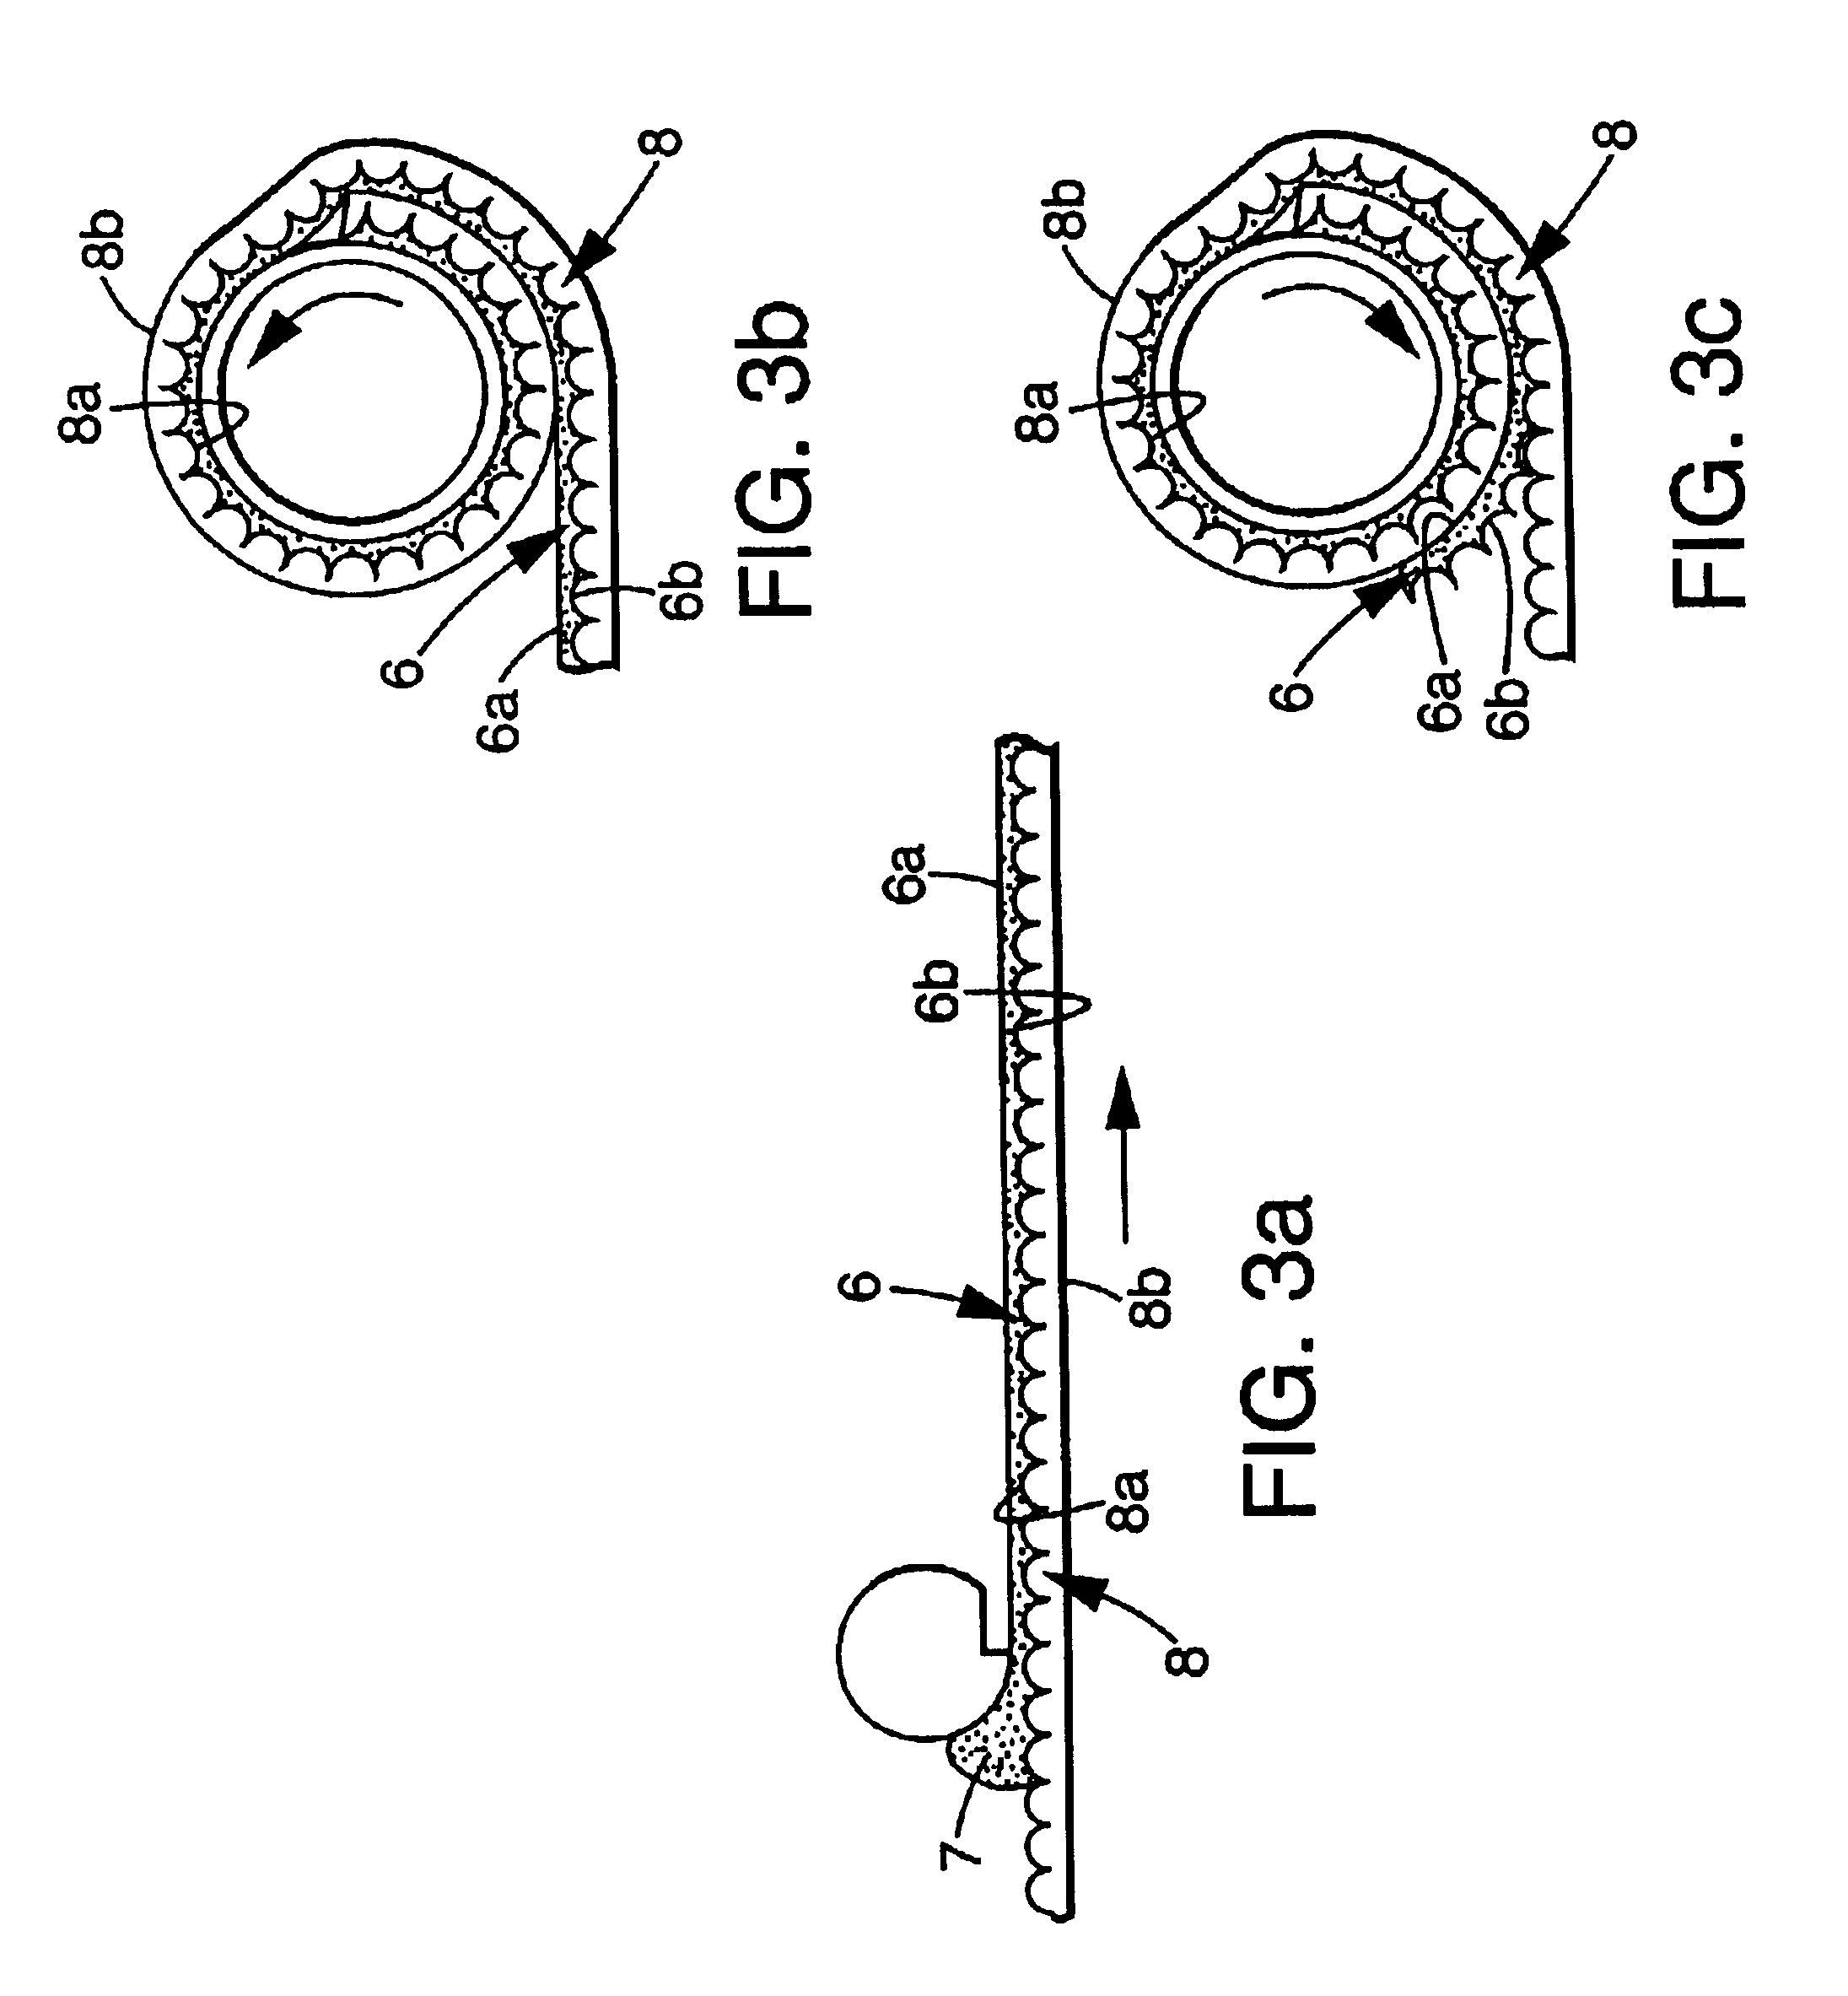 Pressure-sensitive adhesives having microstructured surfaces